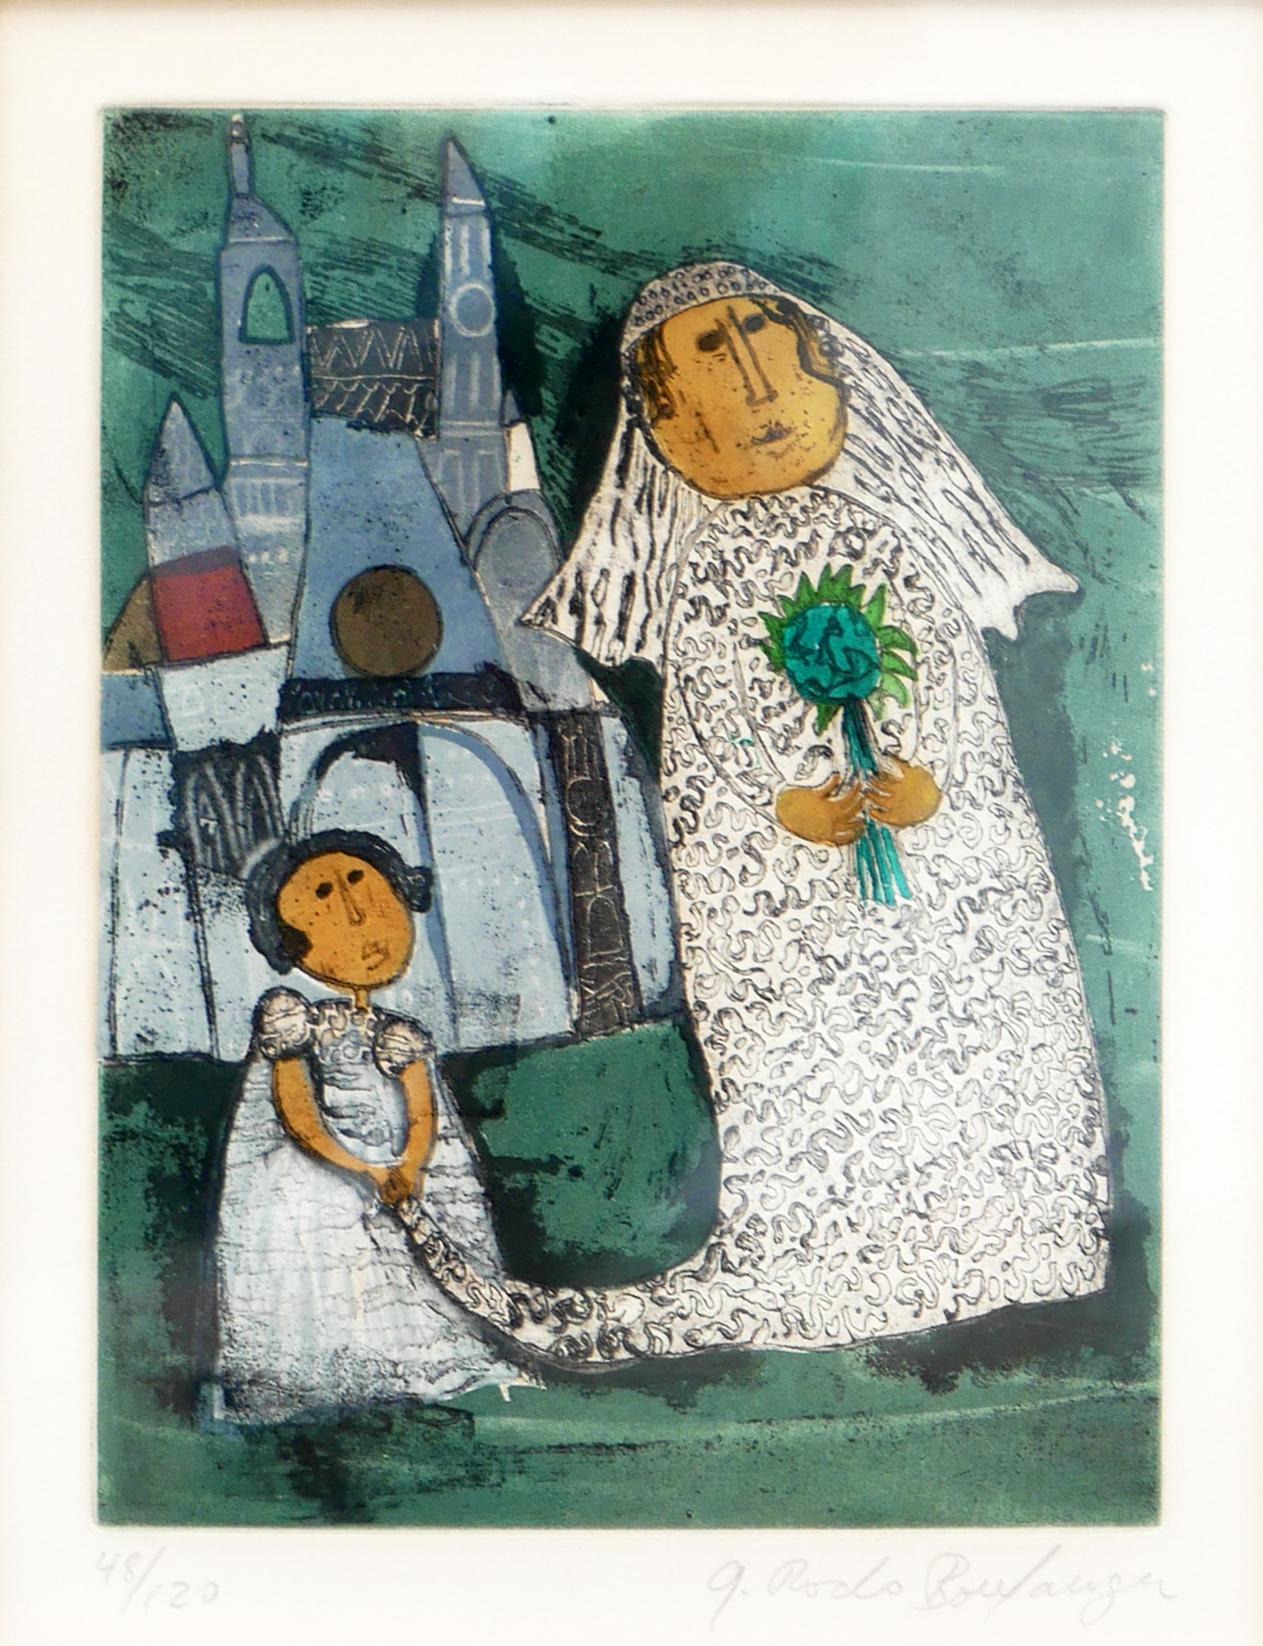 Modern abstract figurative lithograph by Bolivian artist Graciela Rodo Boulanger. The work features a central female figure dressed in a white wedding dress set against a church with a teal background. Signed and editioned along the front central